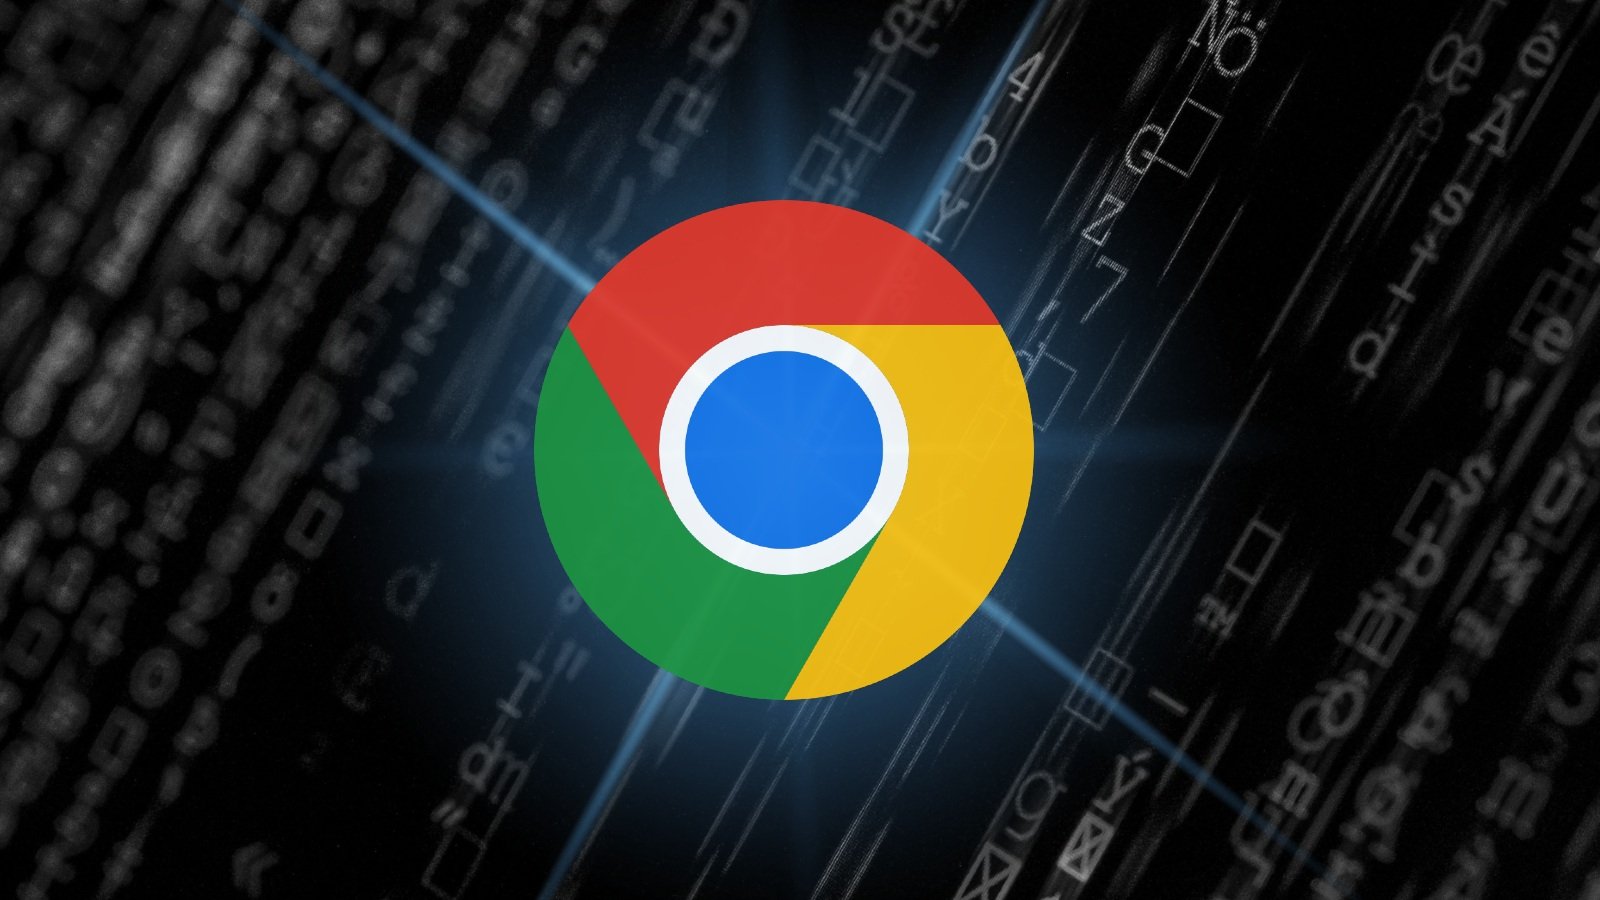 Google Chrome’s new “IP Protection” will hide users’ IP addresses